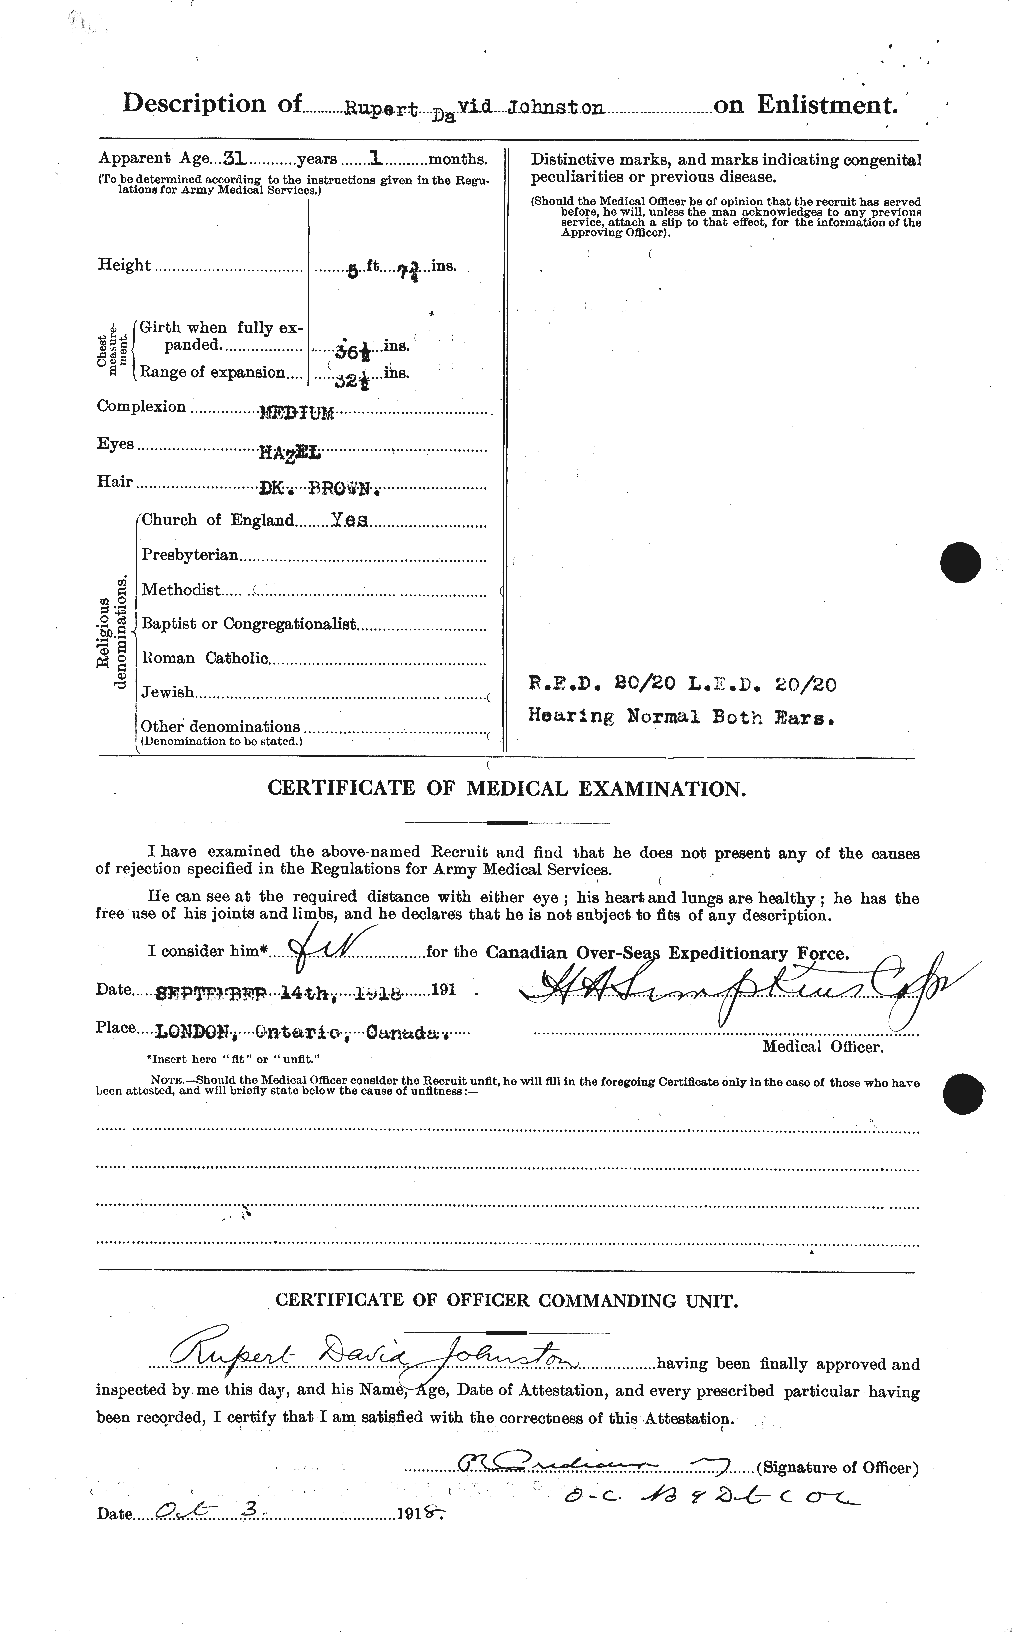 Personnel Records of the First World War - CEF 427070b